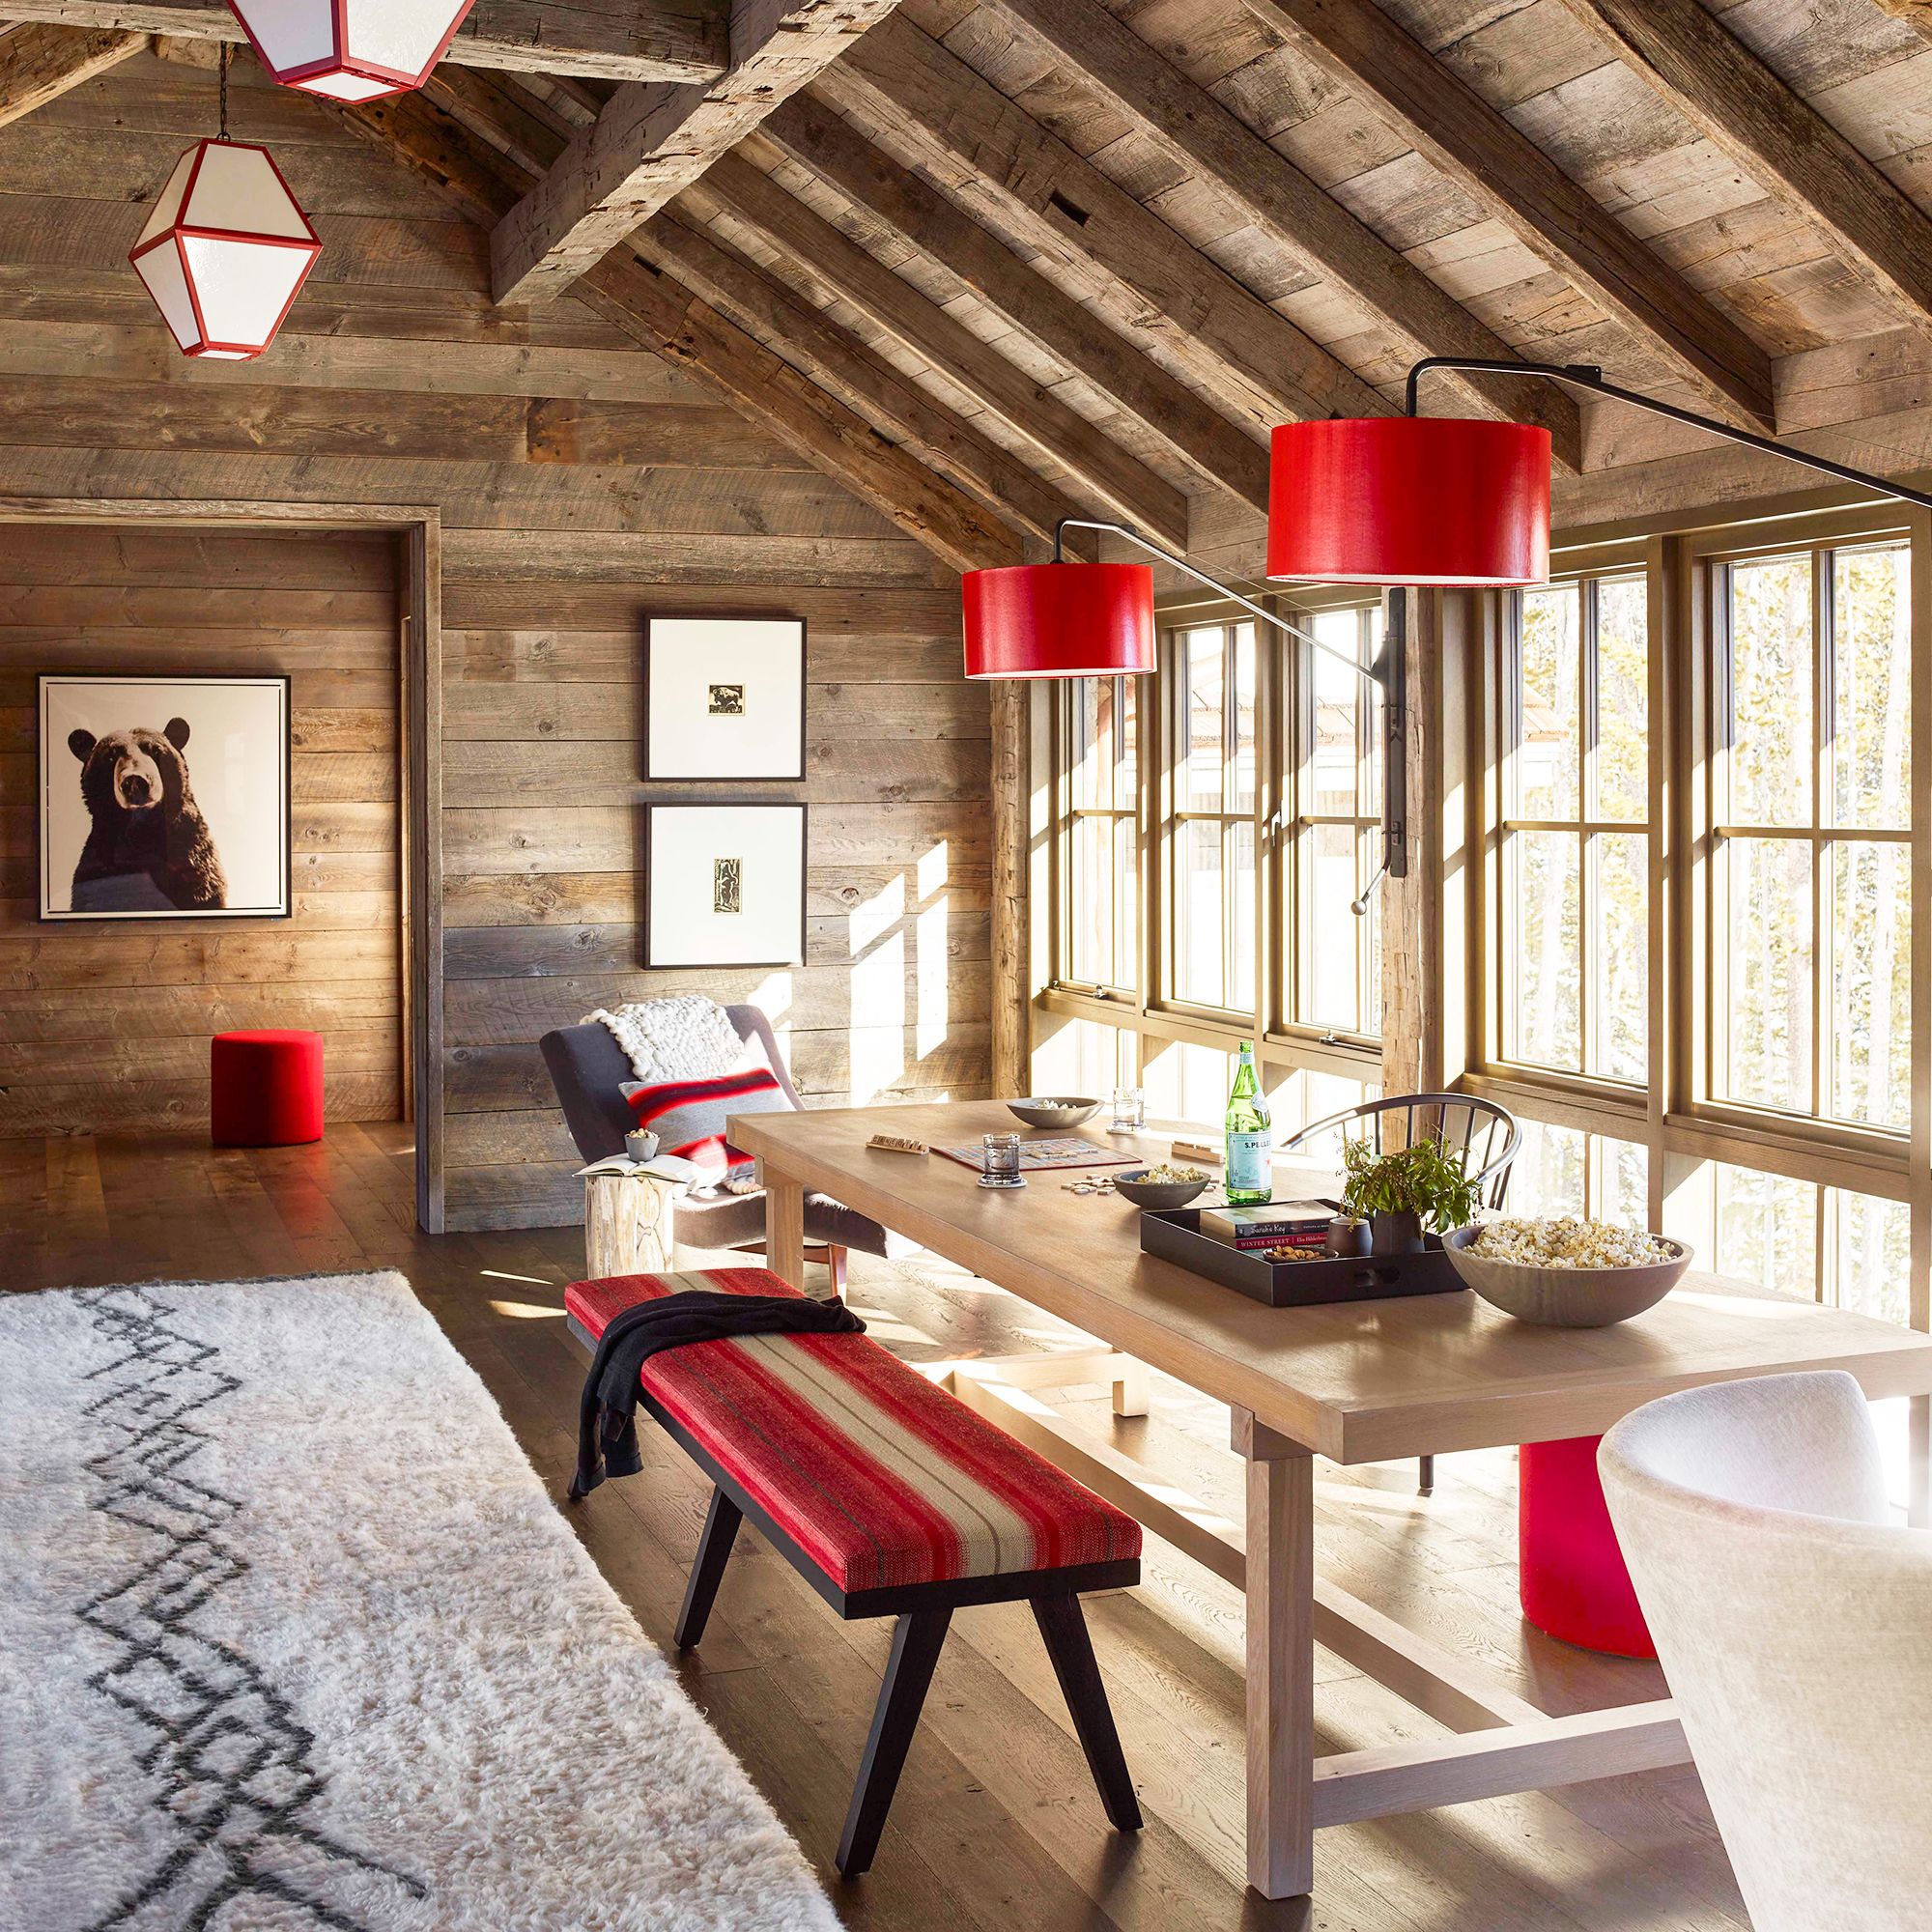 45 Rustic Decorating Ideas to Add Charm and Character